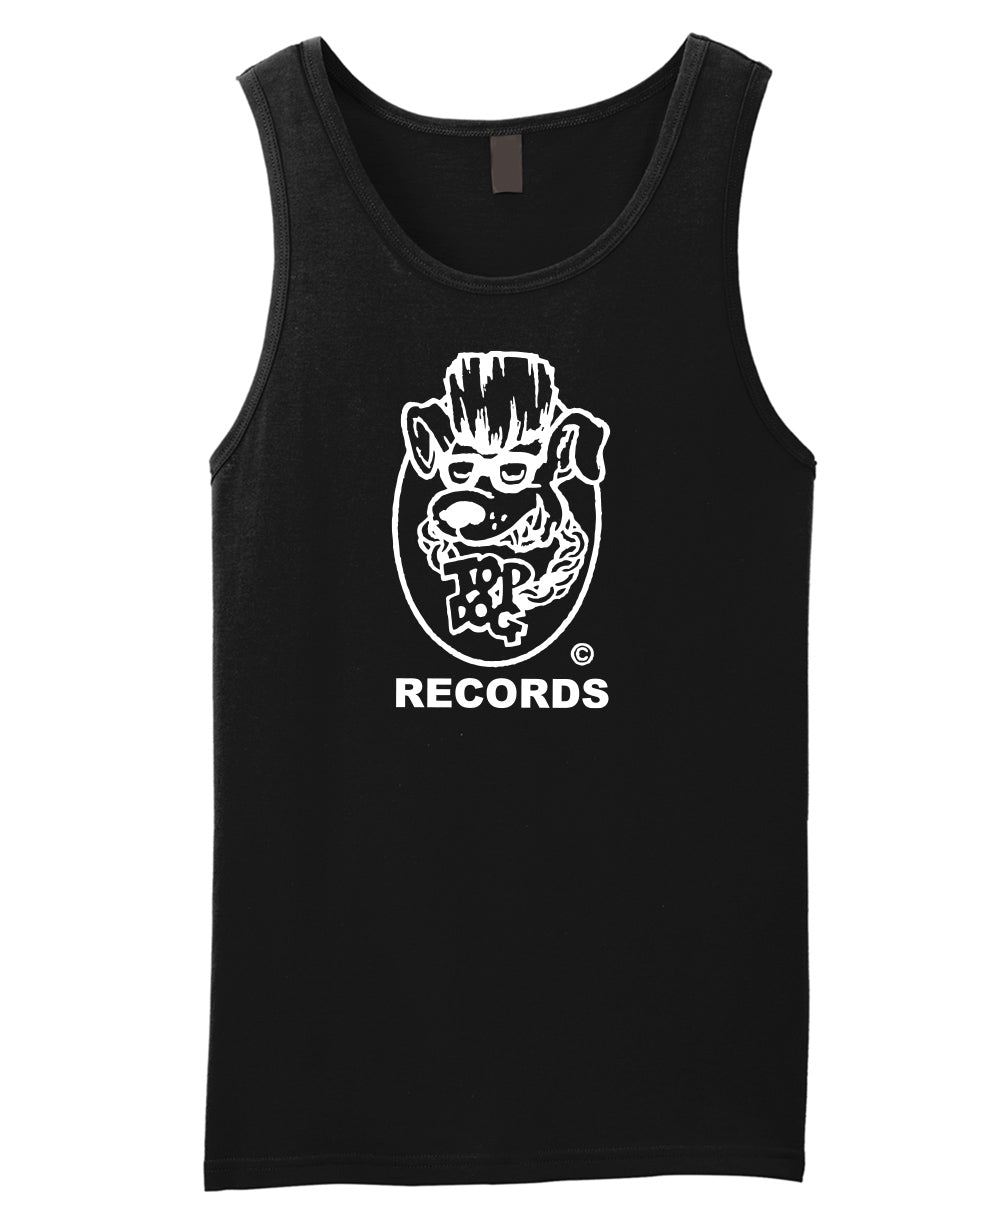 Top Dog Records Jersey Tank